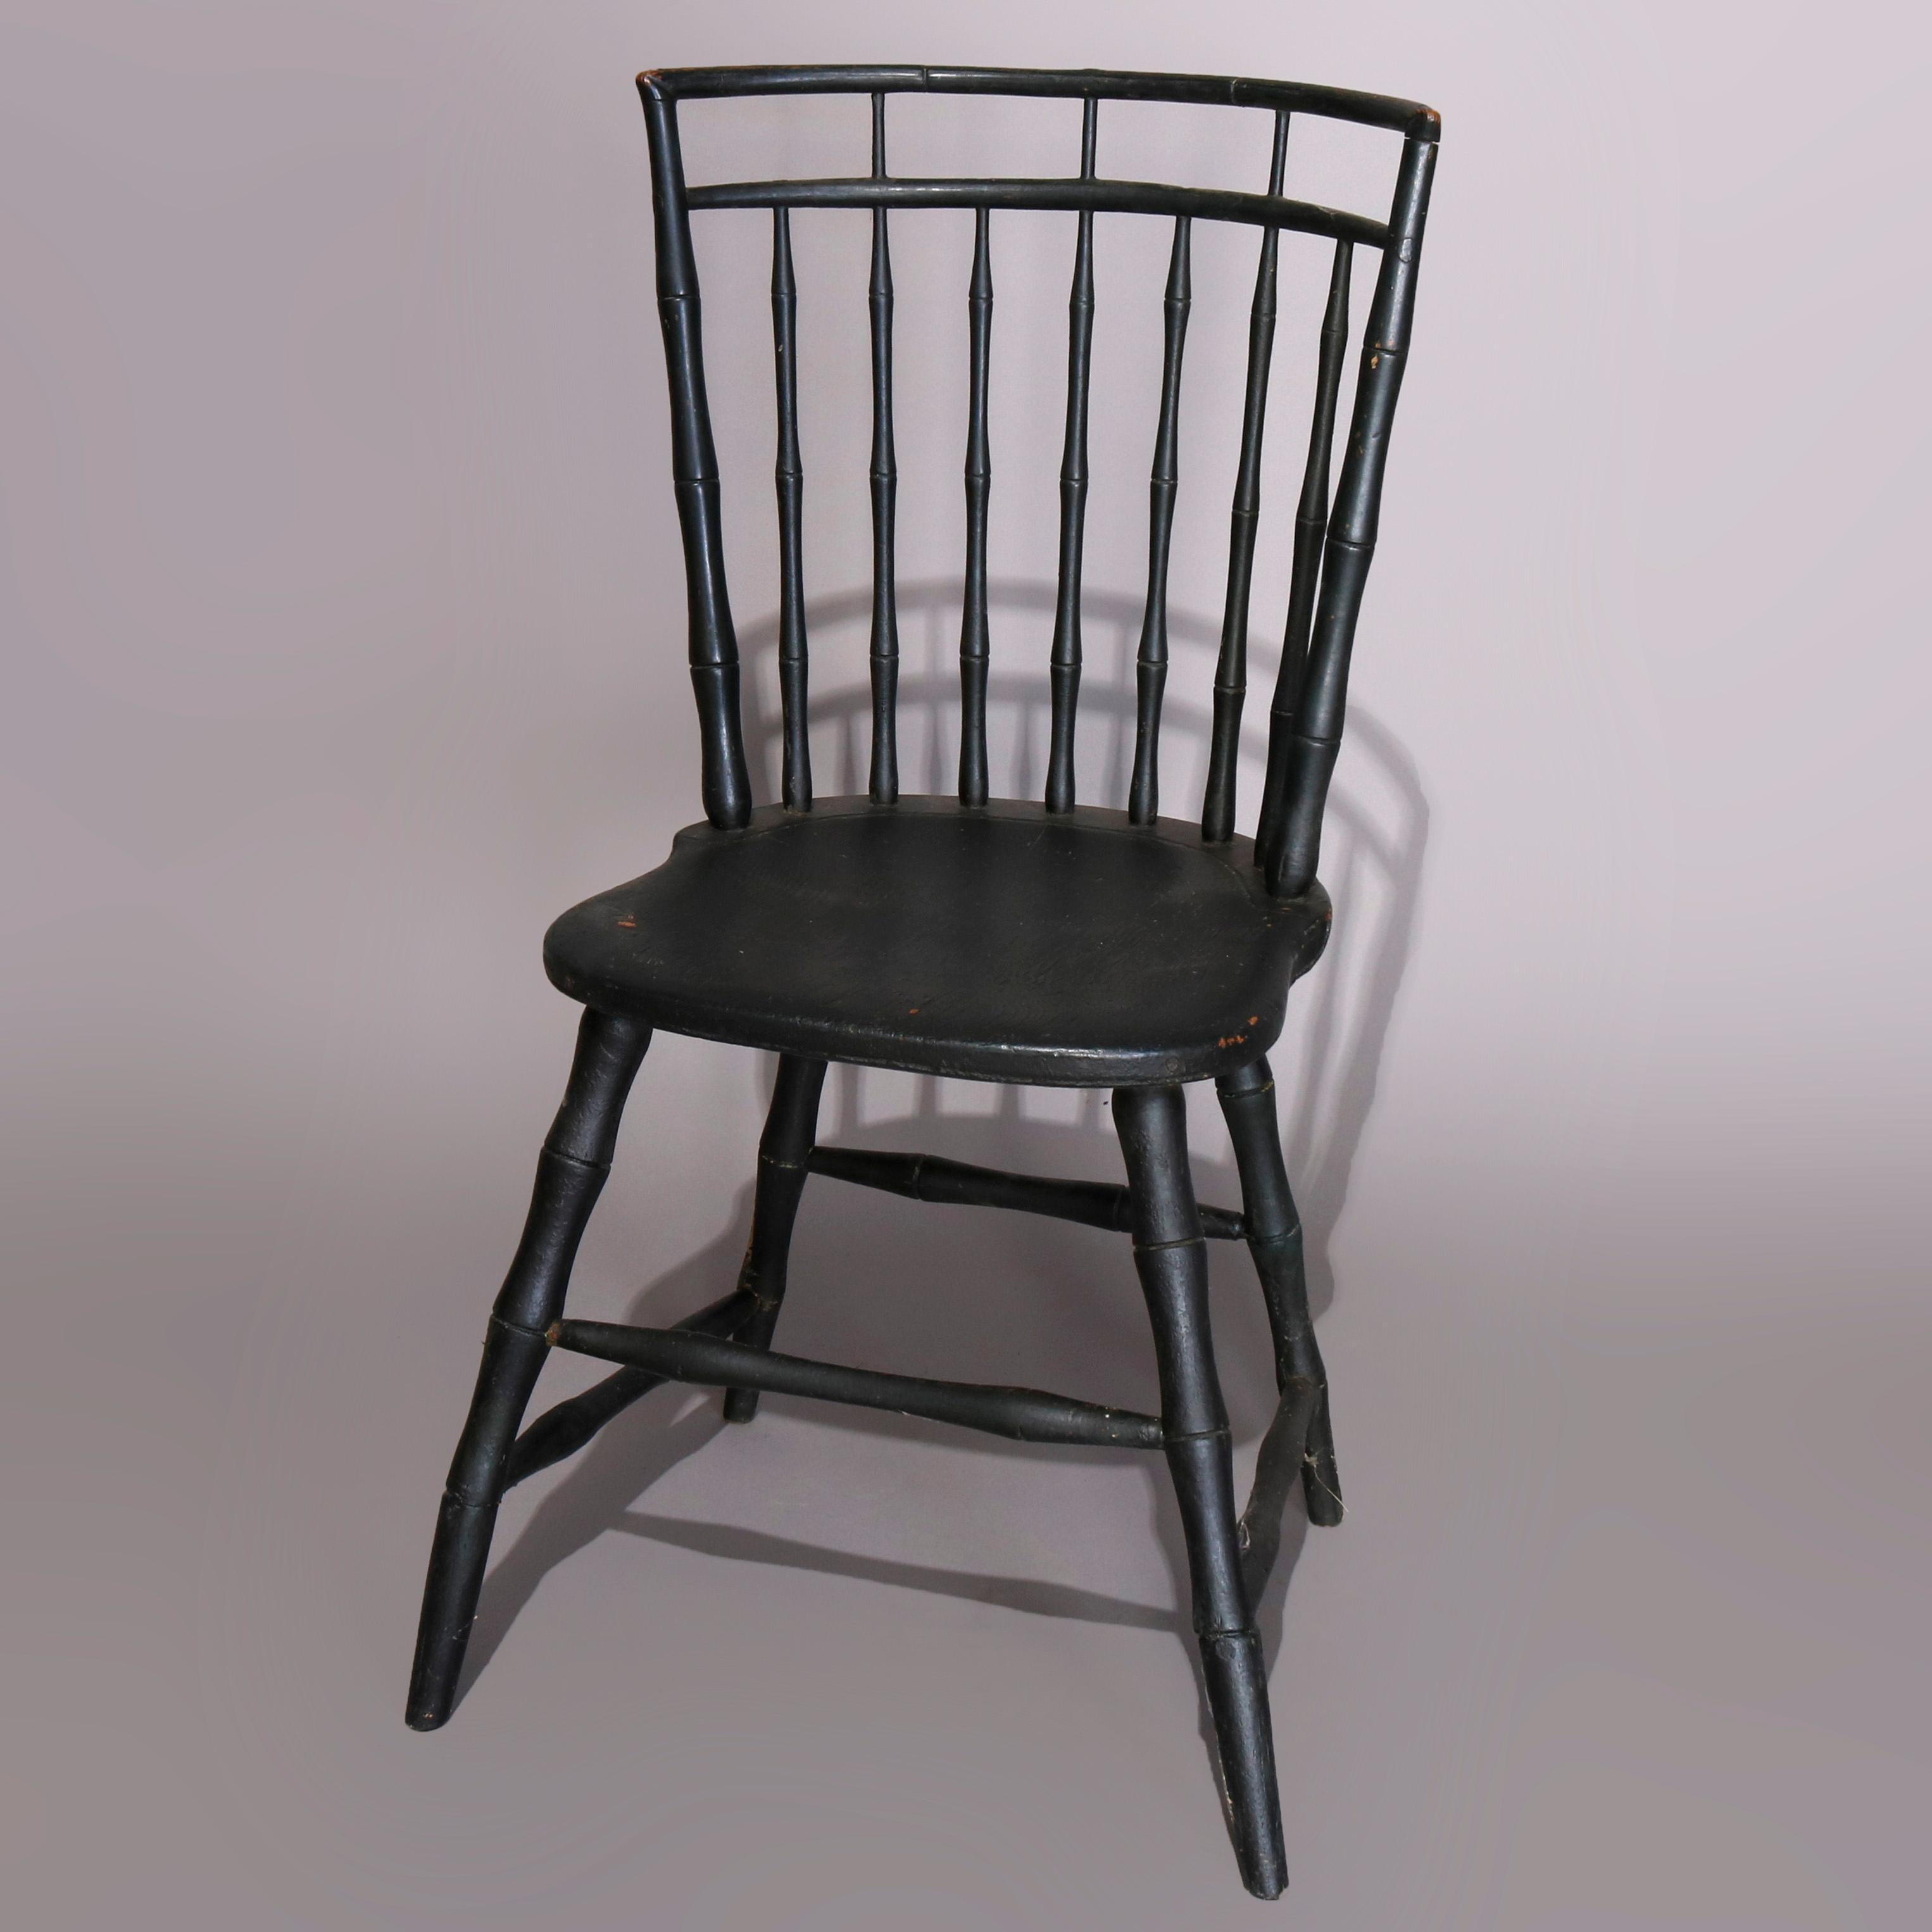 An antique pair of ebonized American Colonial Windsor chairs by James Chapman Tuttle of Salem, Massachusetts (MA) offer spindle backs over shaped seats and raised on stylized bamboo form flared legs, 18th century


Measures: 34.5